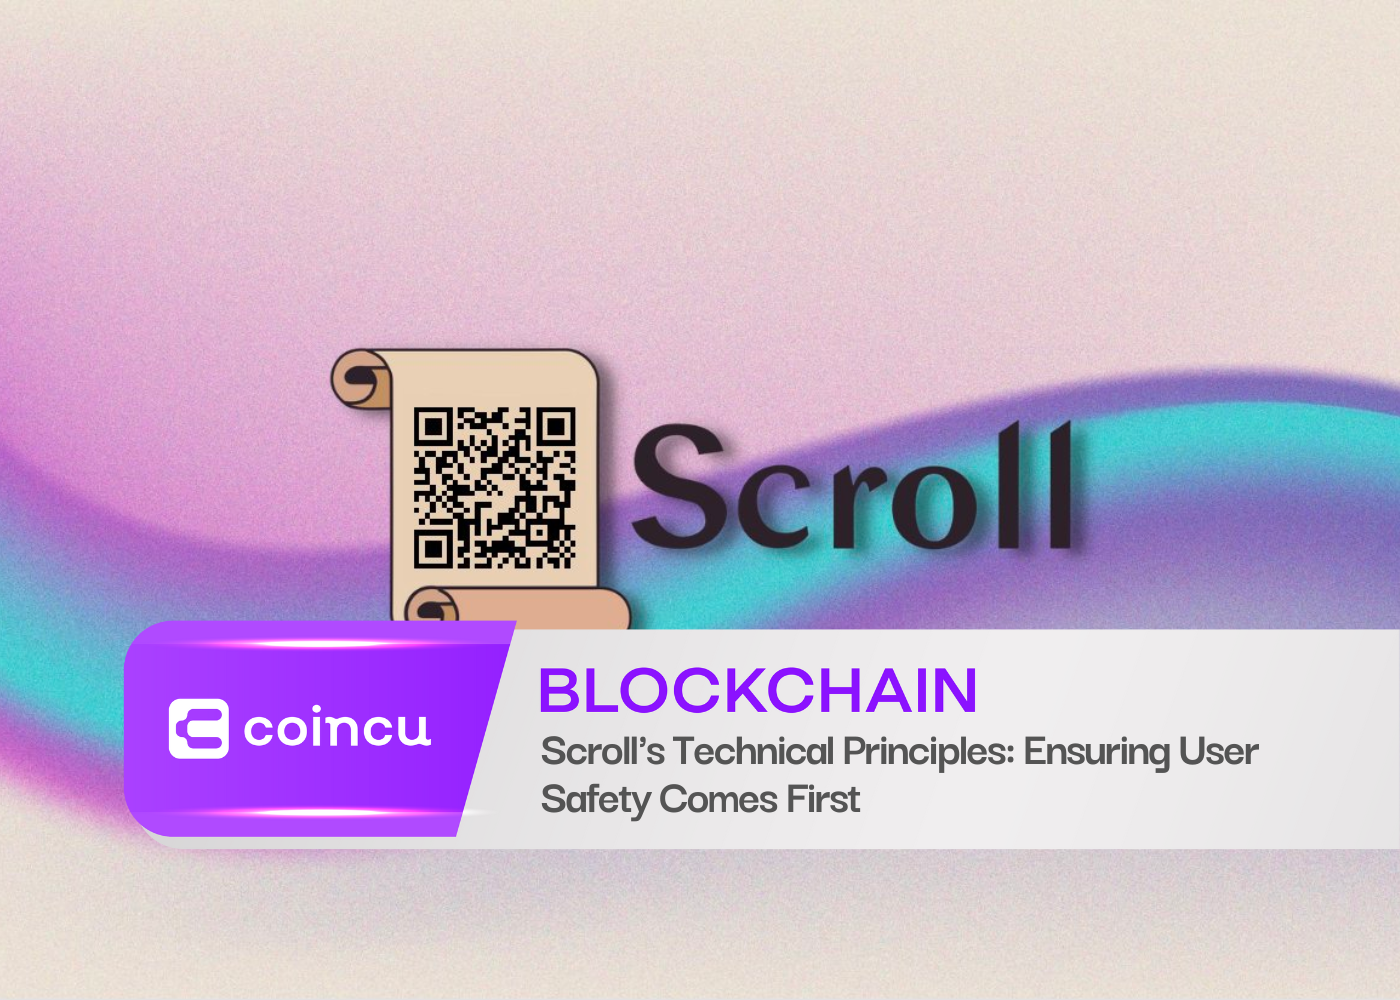 Scroll's Technical Principles: Ensuring User Safety Comes First